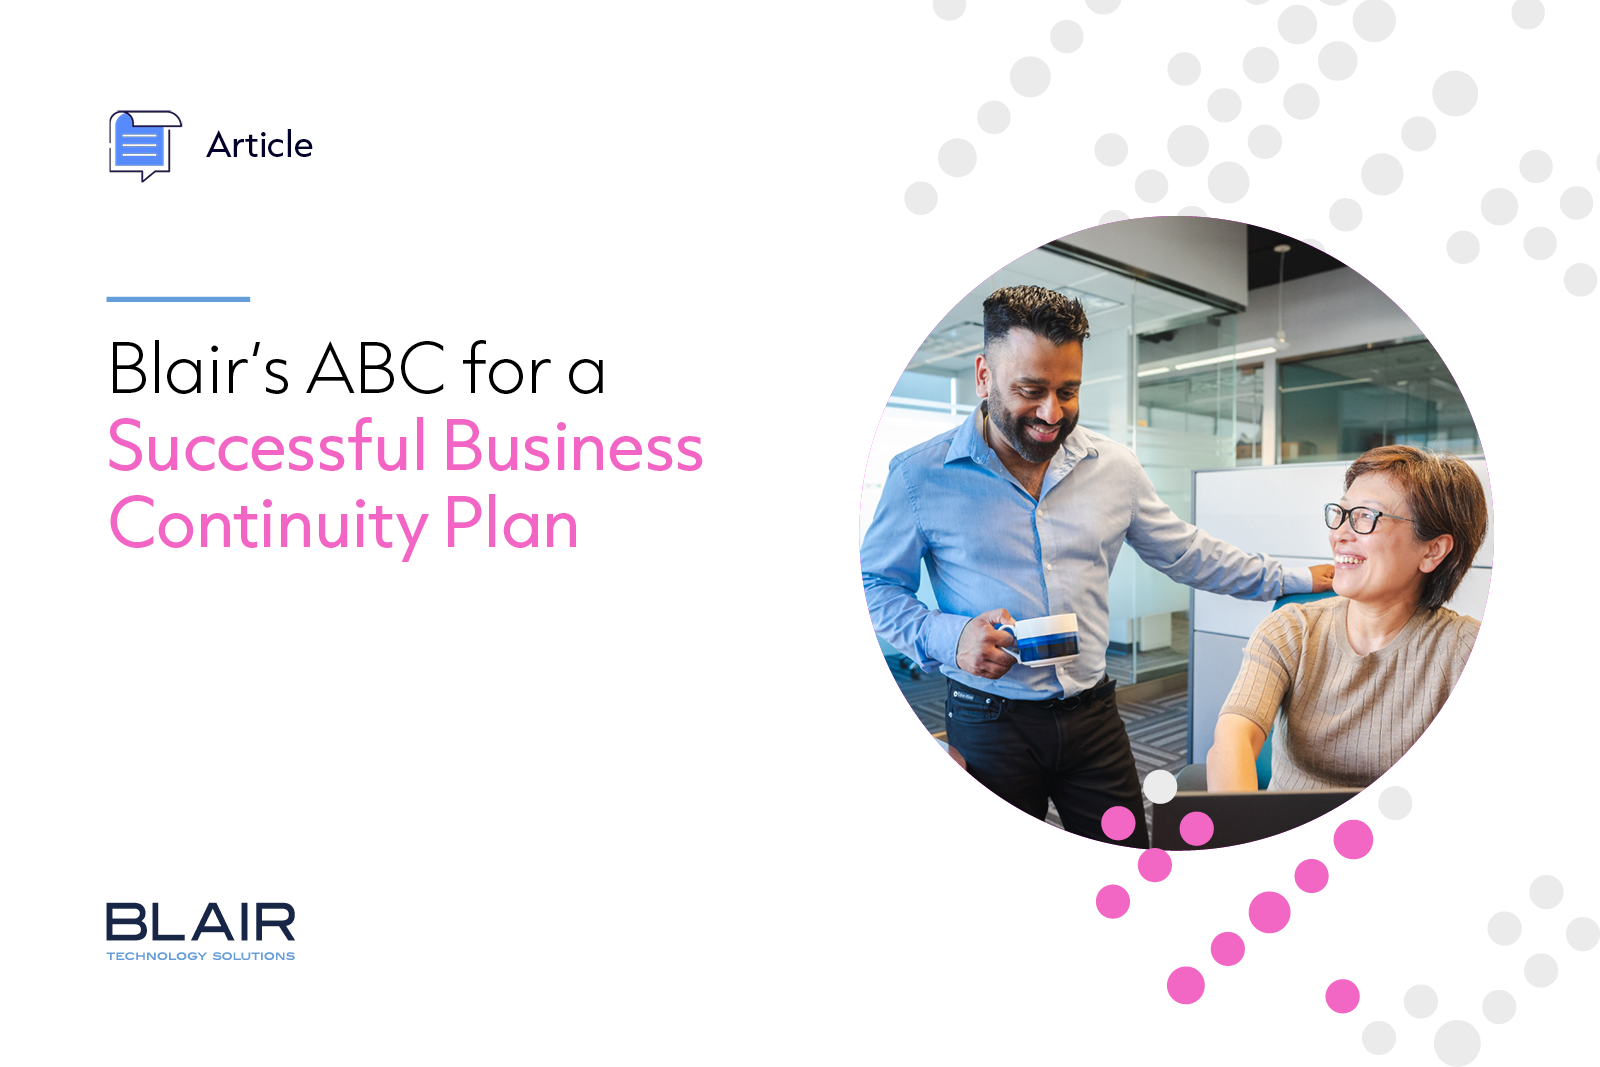 Blair’s ABC for a Successful Business Continuity Plan